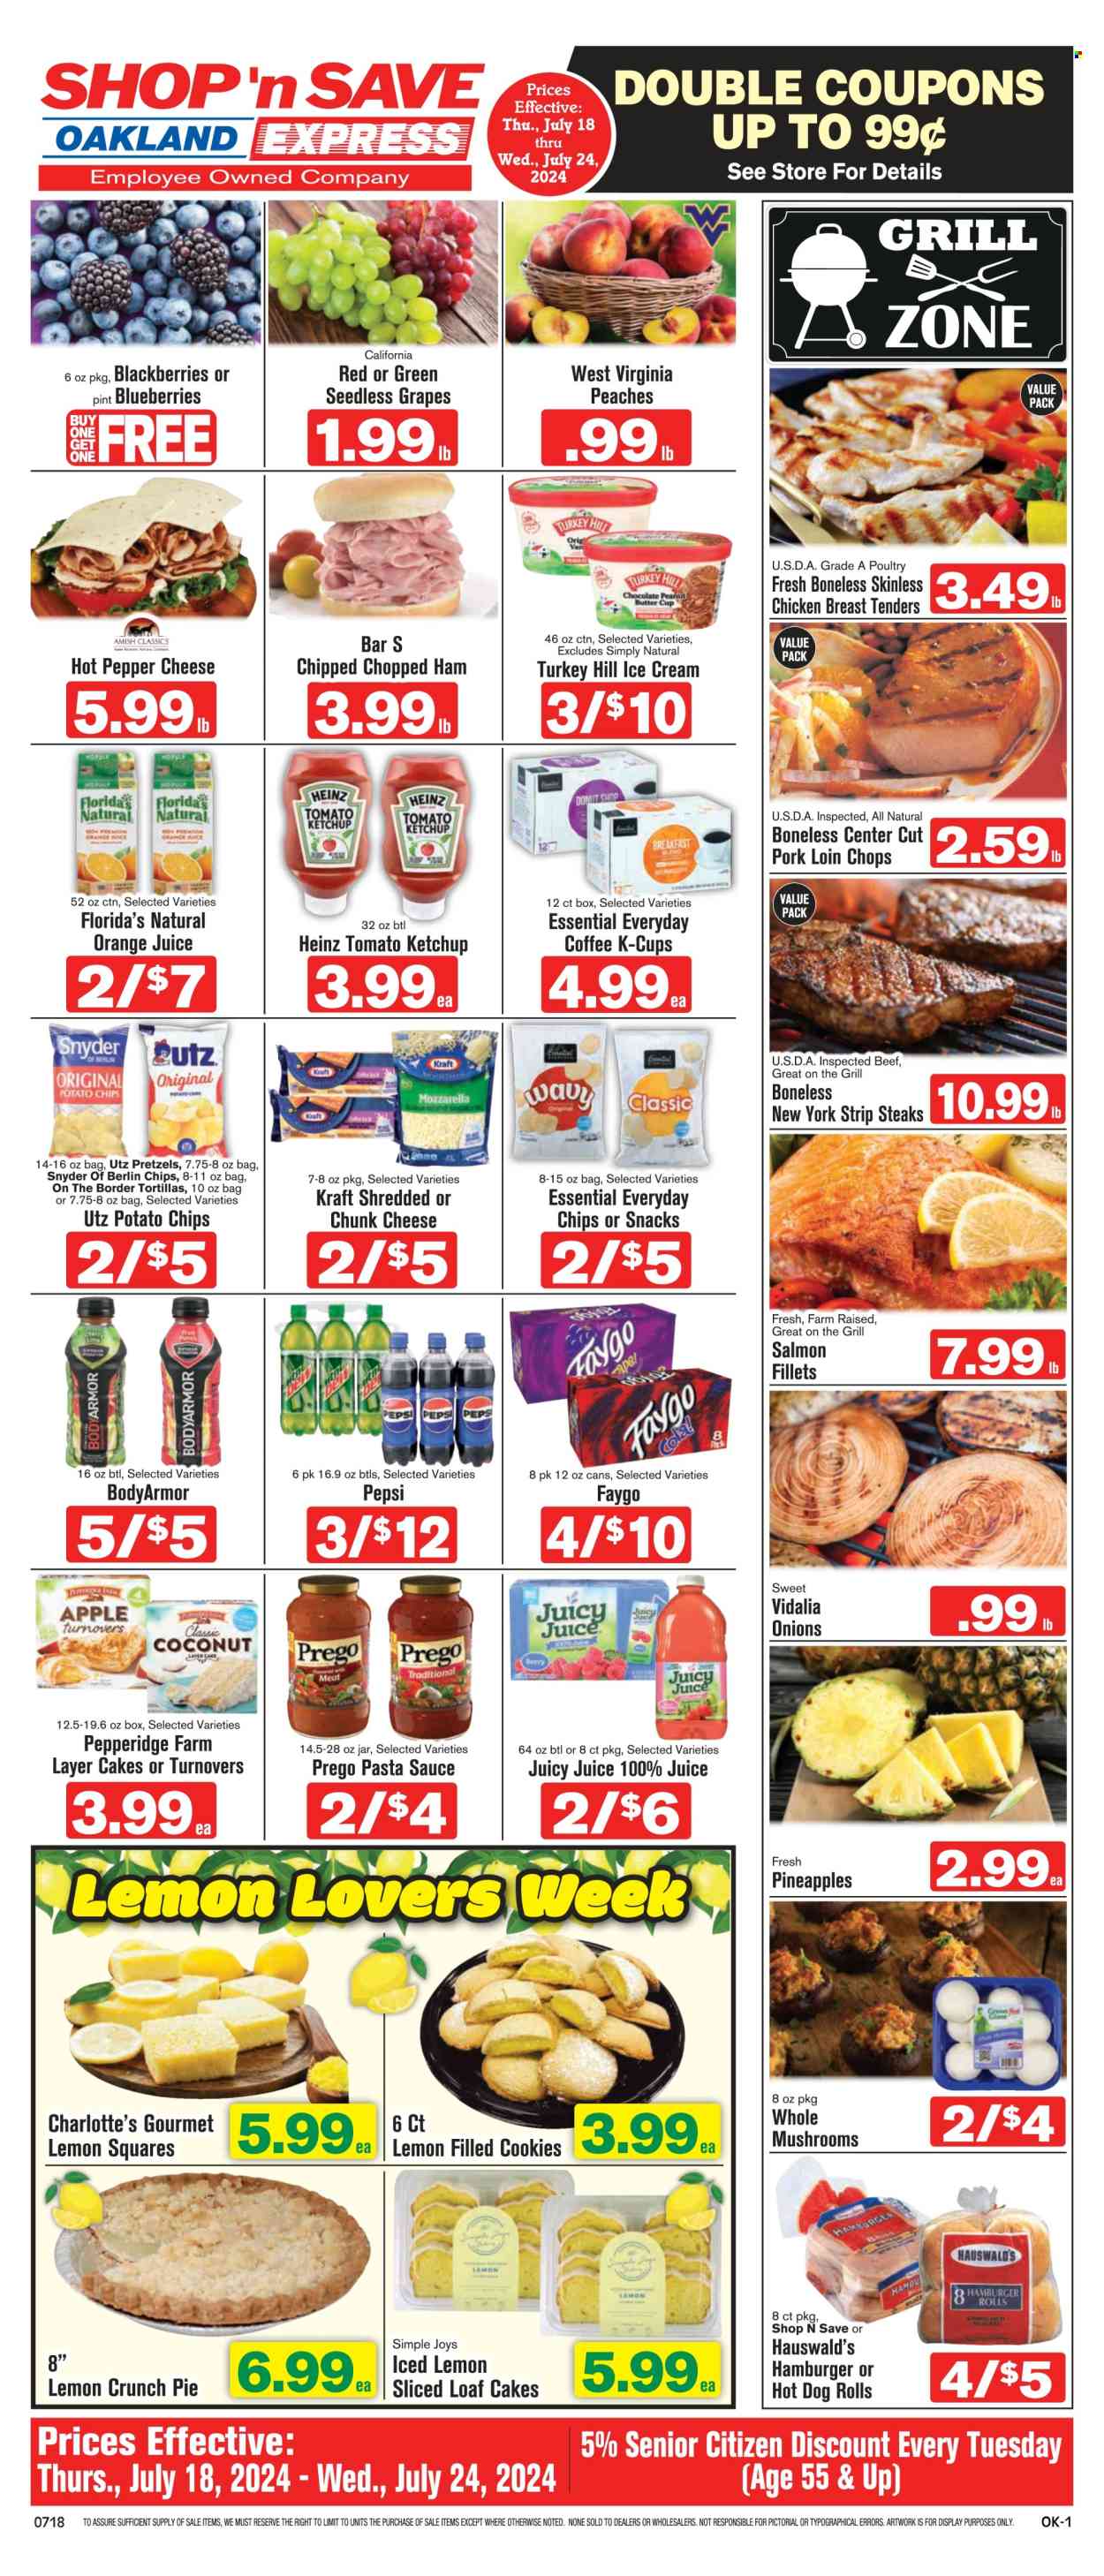 thumbnail - Shop ‘n Save Express Flyer - 07/18/2024 - 07/24/2024 - Sales products - tortillas, hot dog rolls, pretzels, pie, burger buns, turnovers, sandwich rolls, loaf cake, onion, blackberries, grapes, seedless grapes, pineapple, peaches, chicken tenders, beef meat, beef steak, steak, striploin steak, pork chops, pork loin, pork meat, fish fillets, salmon, salmon fillet, pasta sauce, Kraft®, spaghetti sauce, ham, mozzarella, shredded cheese, cheese, chunk cheese, ice cream, peanut butter cups, Florida's Natural, potato chips, Heinz, ketchup, peanut butter, Pepsi, orange juice, juice, soft drink, electrolyte drink, carbonated soft drink, coffee capsules, K-Cups, breakfast blend. Page 1.